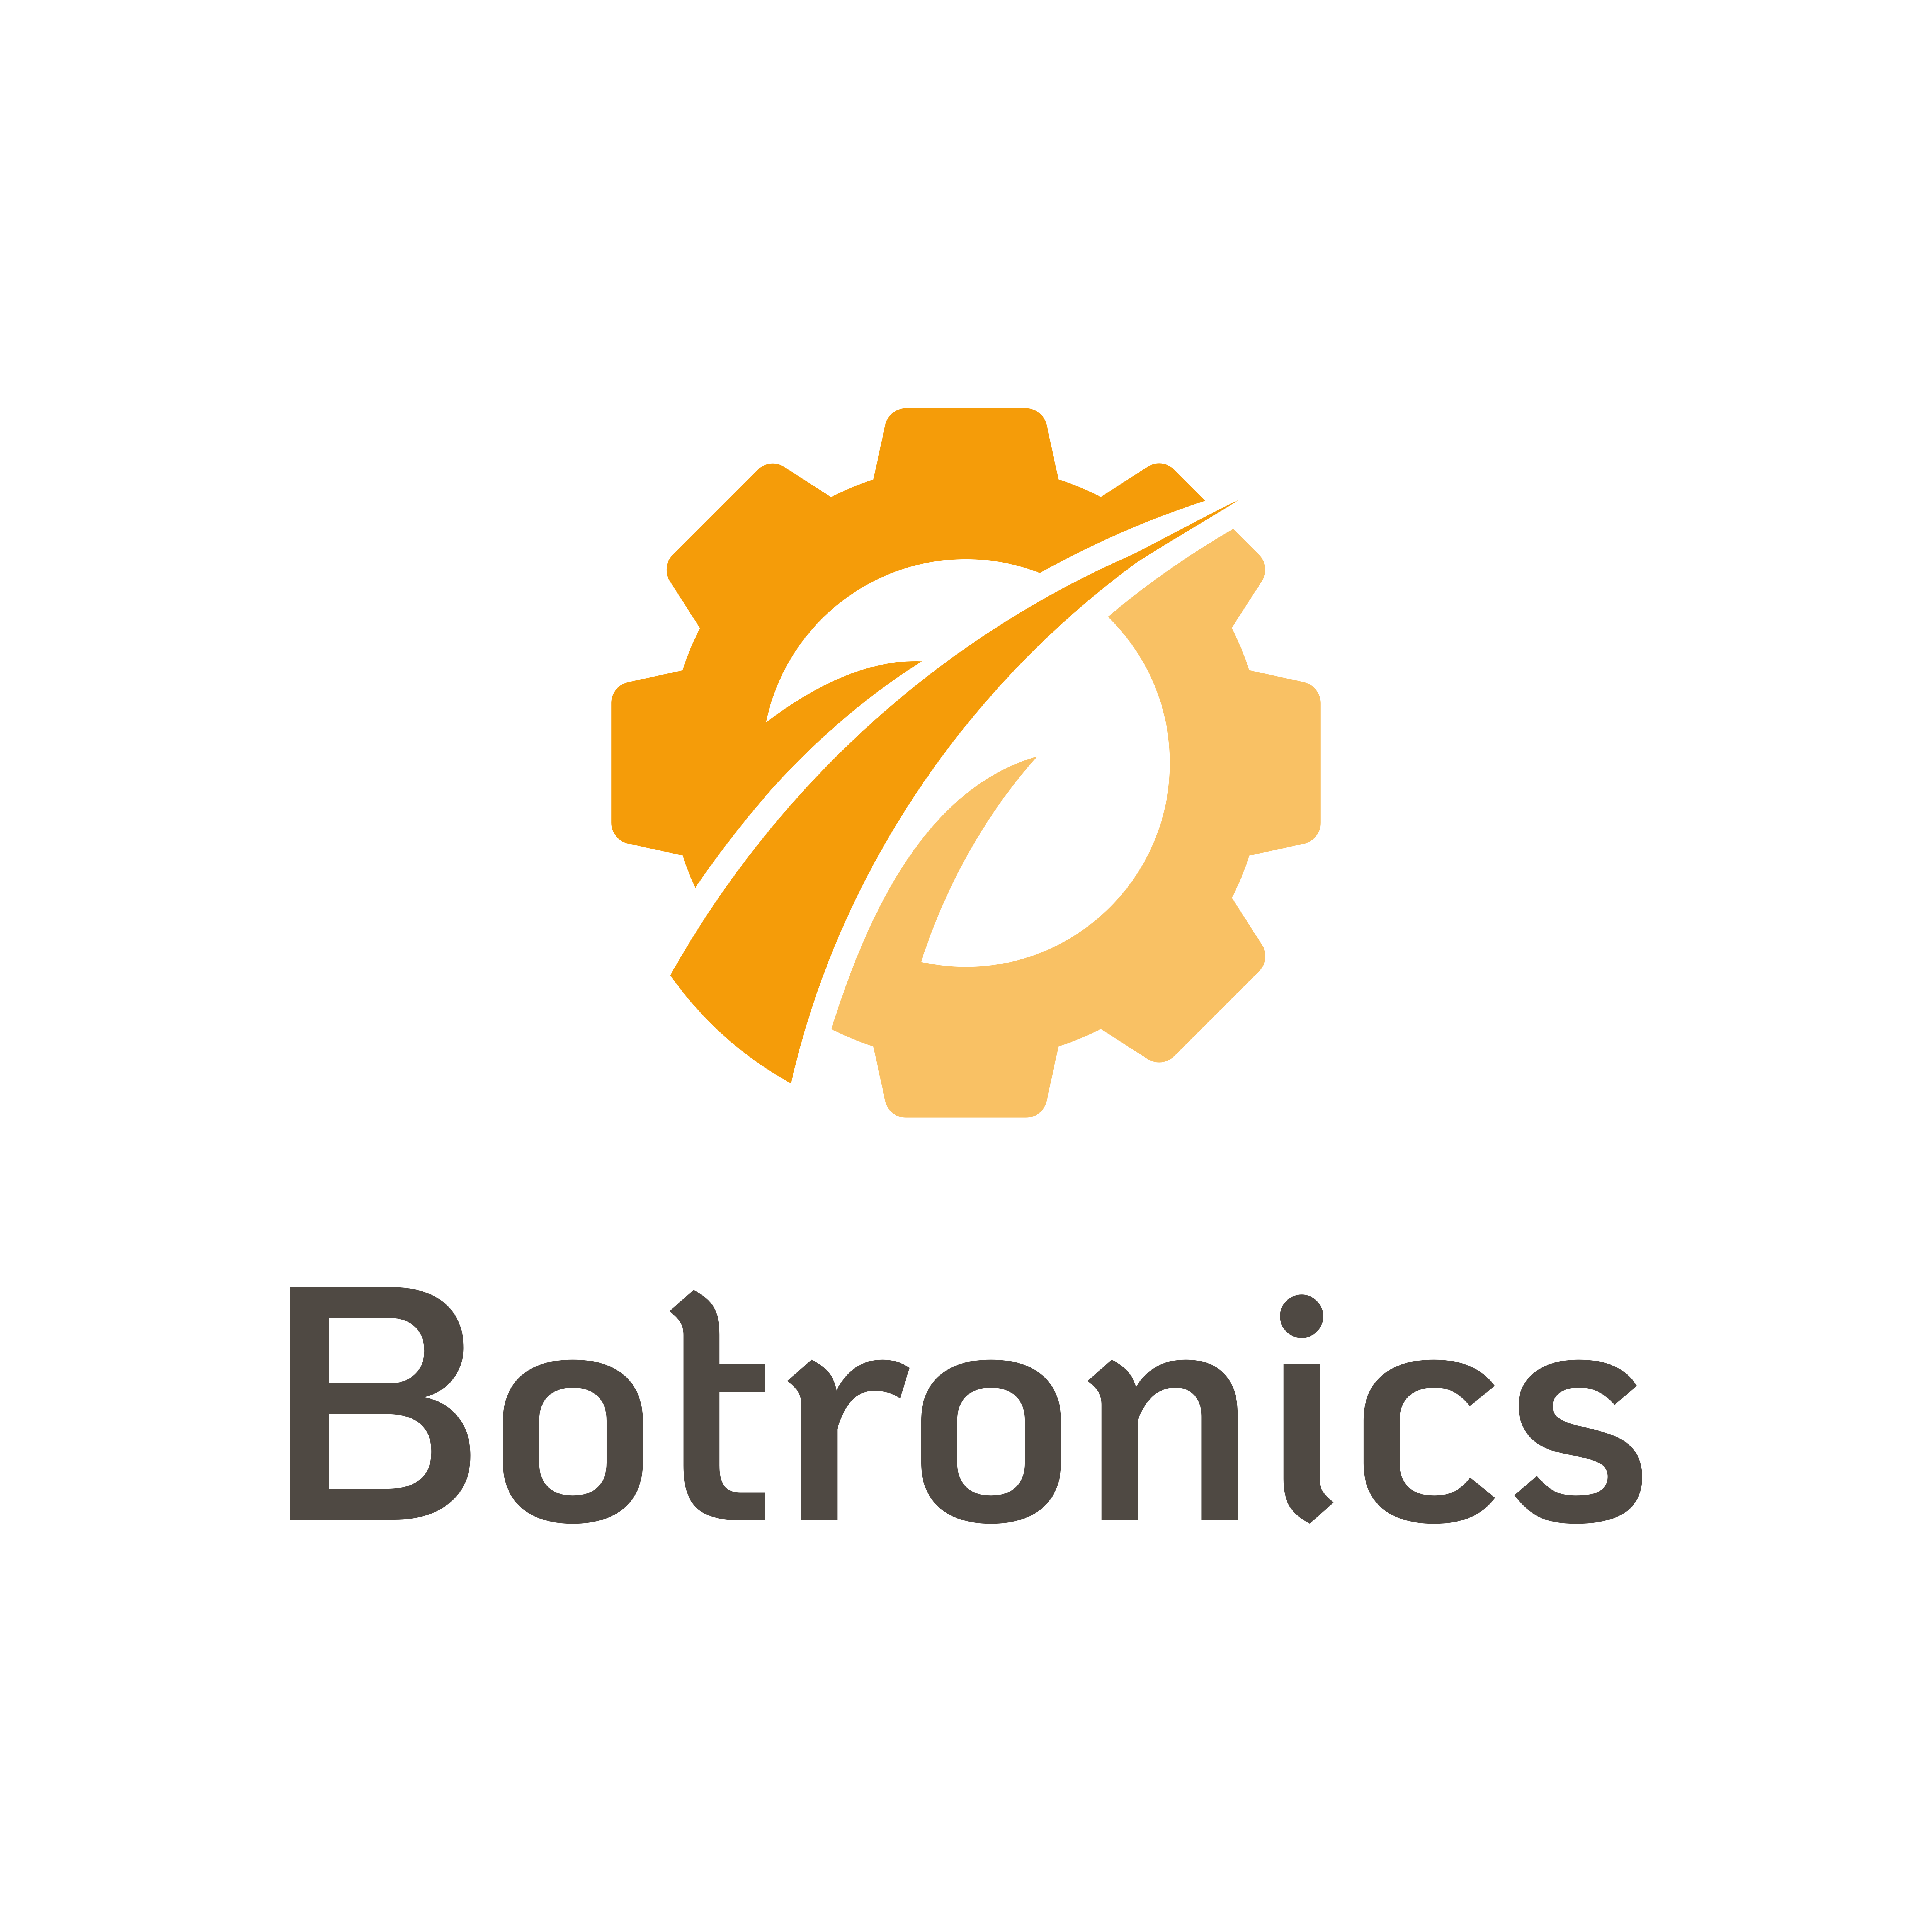 BOTRONICS pioneers intelligent, connected, and autonomous robotic solutions, with their inaugural project focused on an autonomous golf cart.